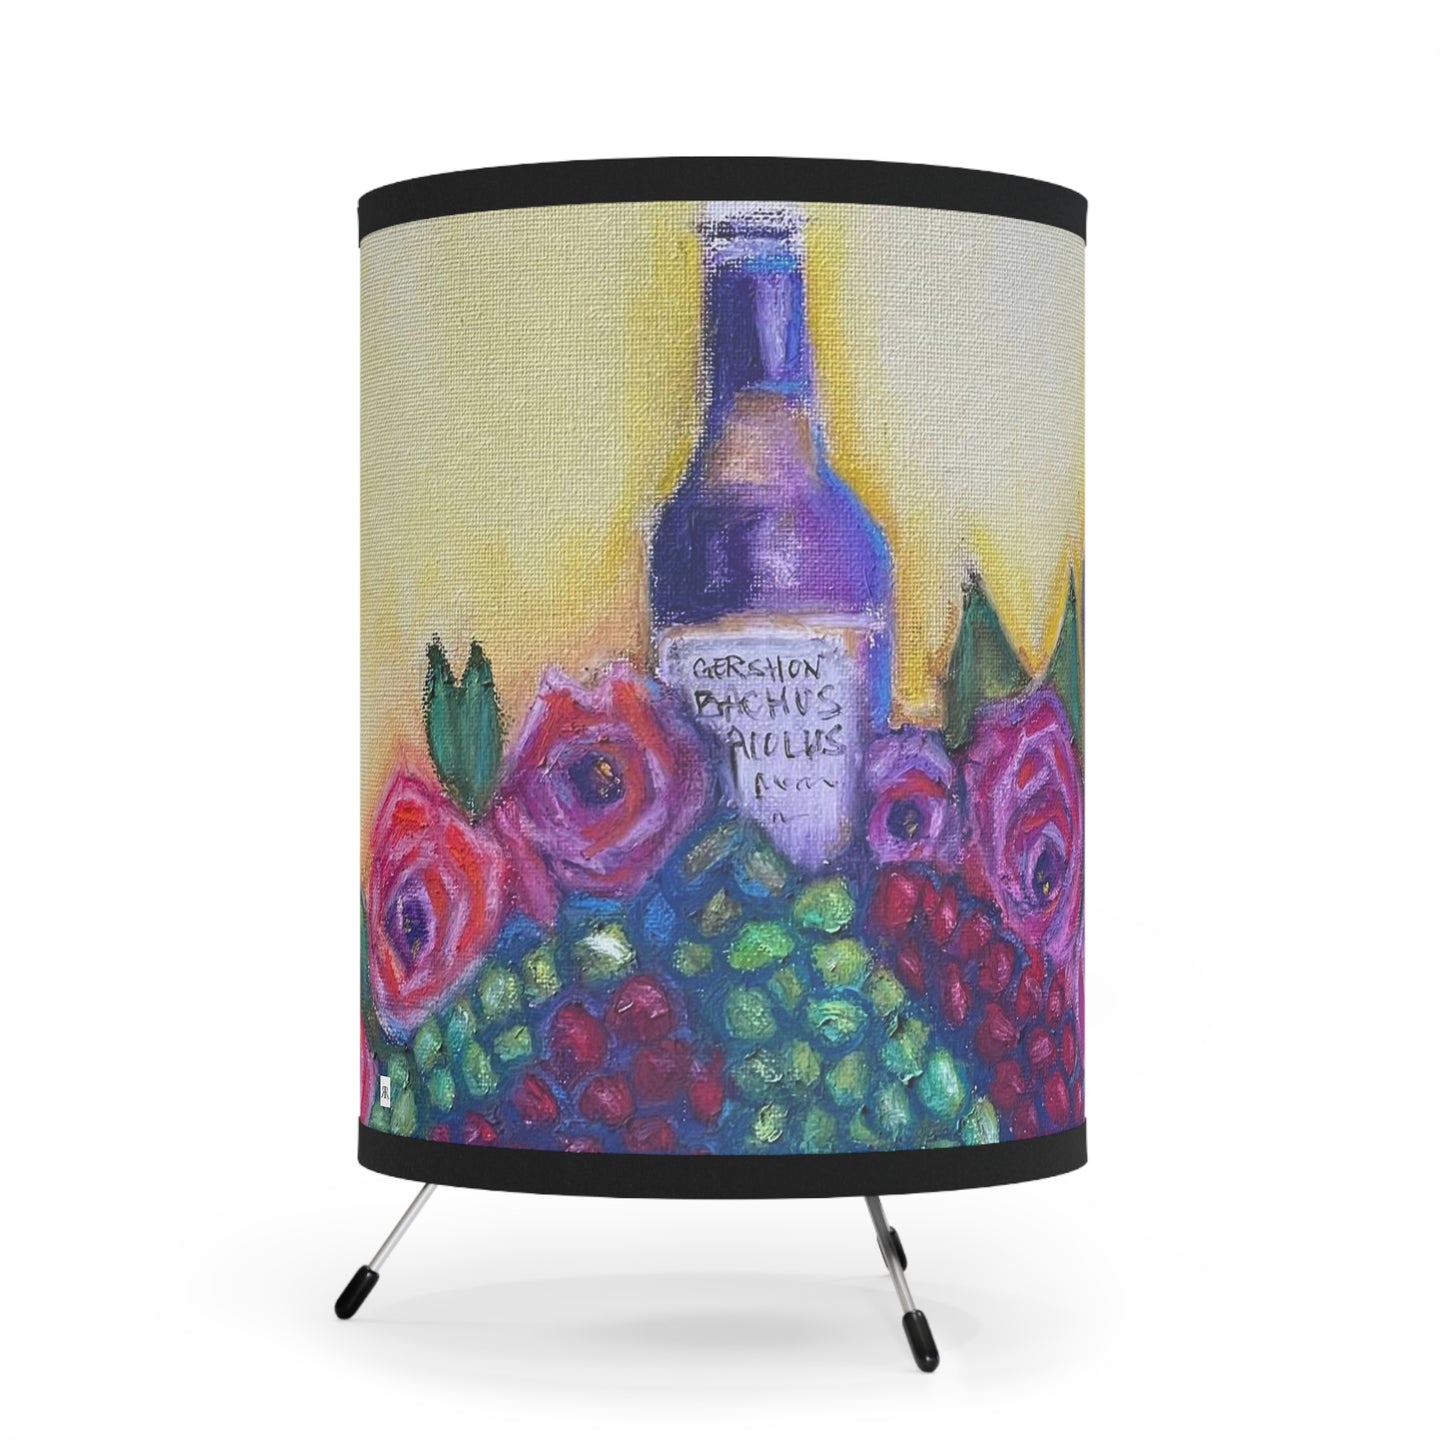 GBV Wine and Roses Tripod Lamp